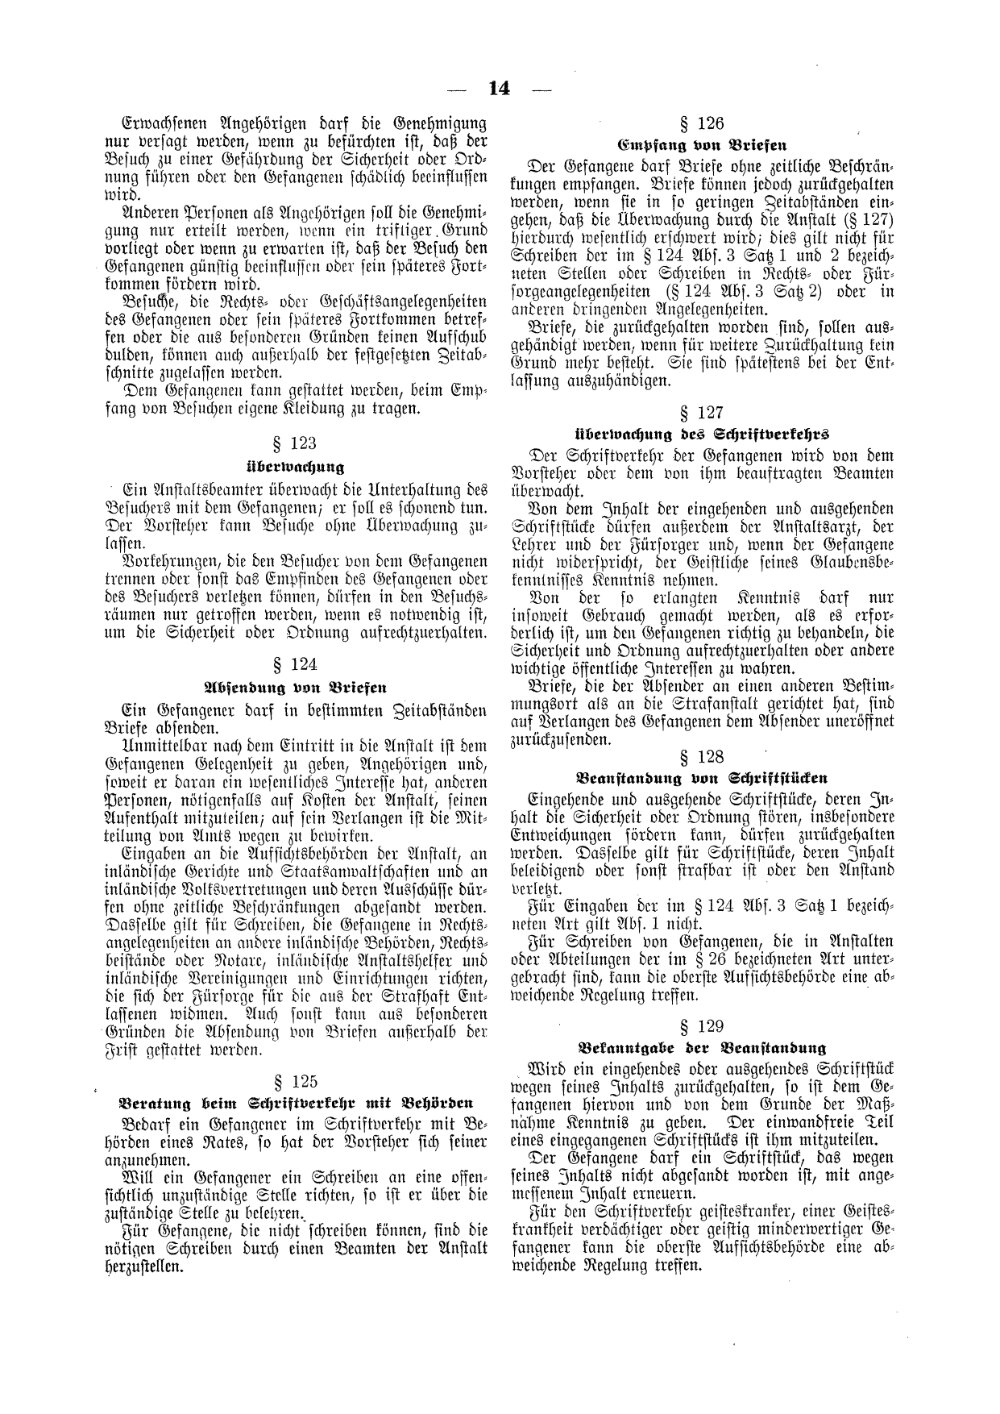 Scan of page 14